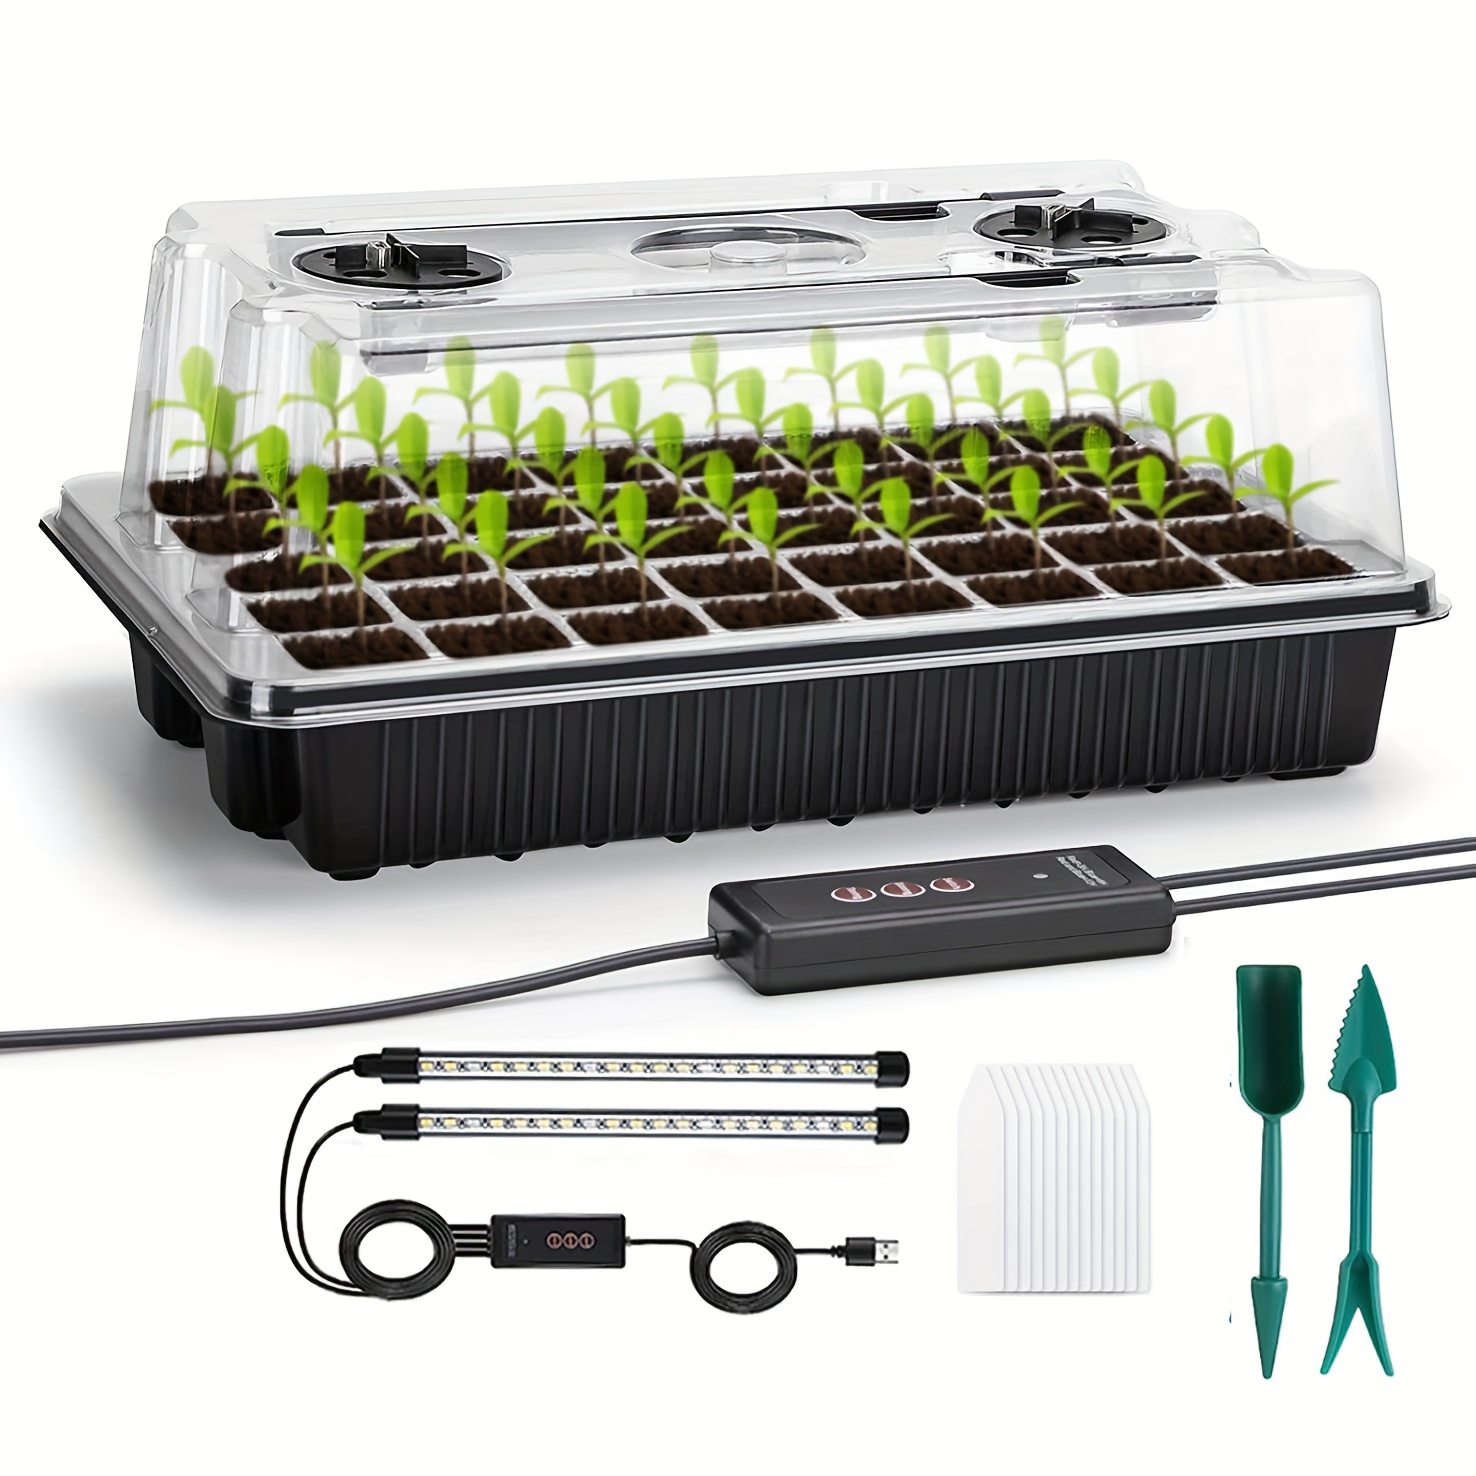 

1 Set, Seed Starter Trays With 2 Long Strip Grow Lights, 40 Cells Seed Starter Kit With Humidity Dome, Seedling Starter Trays For Seed Germination Kit, Seedling Starting, Propagation, Cloning Plants